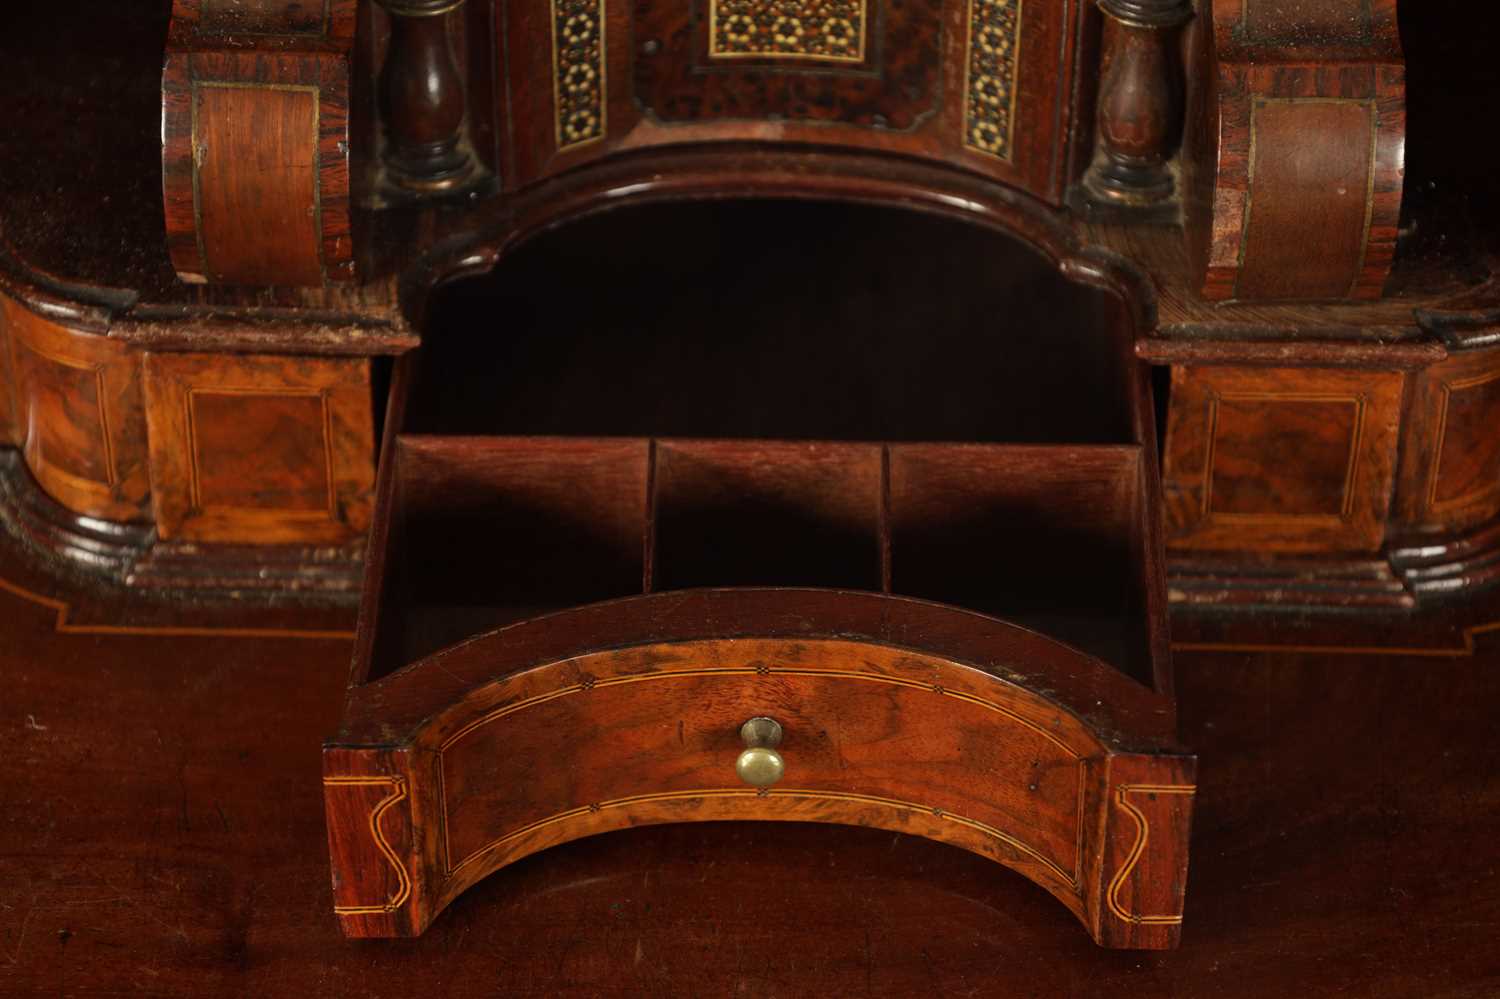 AN IMPORTANT FINE GEORGE II BRASS INLAID FIGURED MAHOGANY BUREAU ATTRIBUTED TO JOHN CHANNON - Image 8 of 16